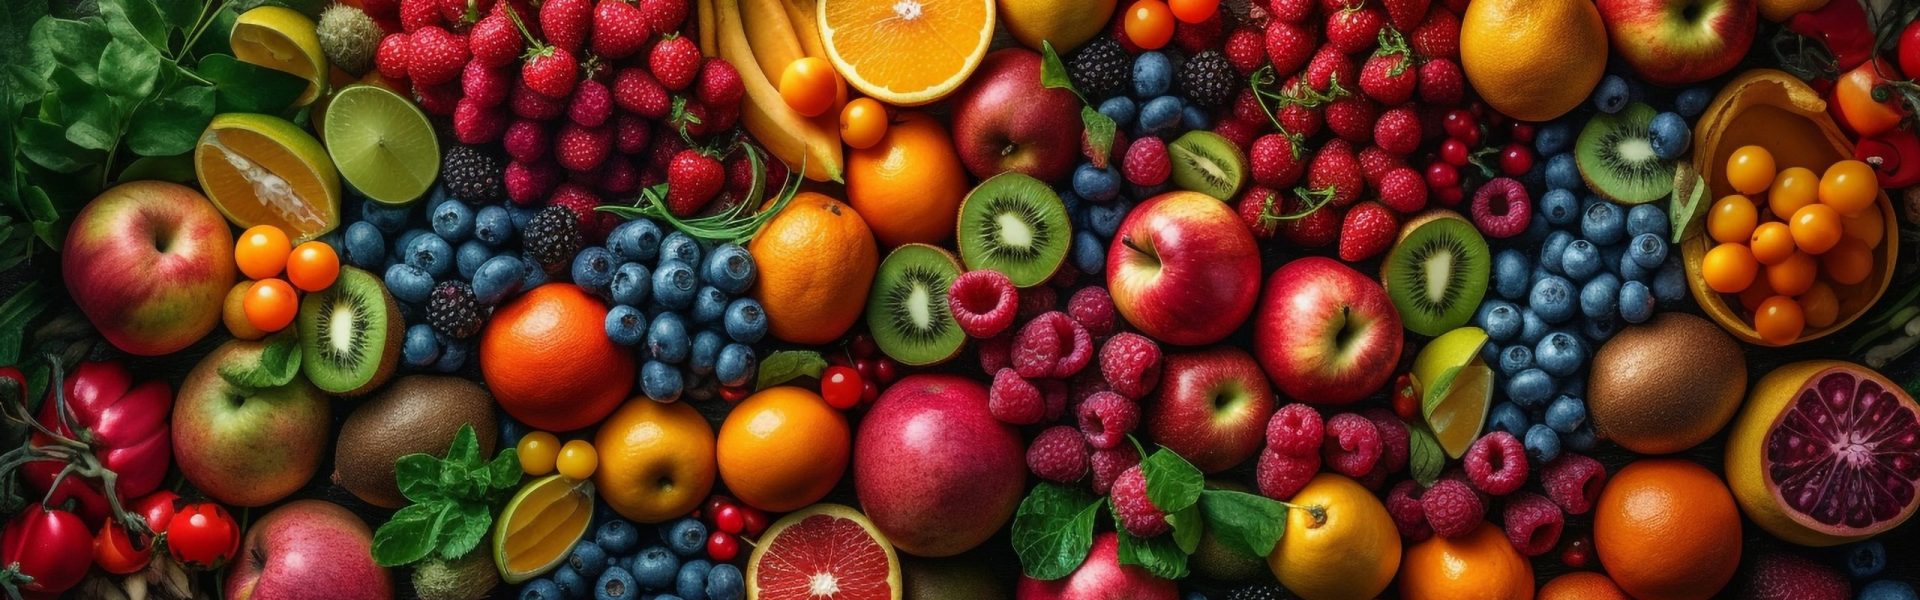 Healthy eating Fresh fruits and vegetables collection generated by artificial intelligence